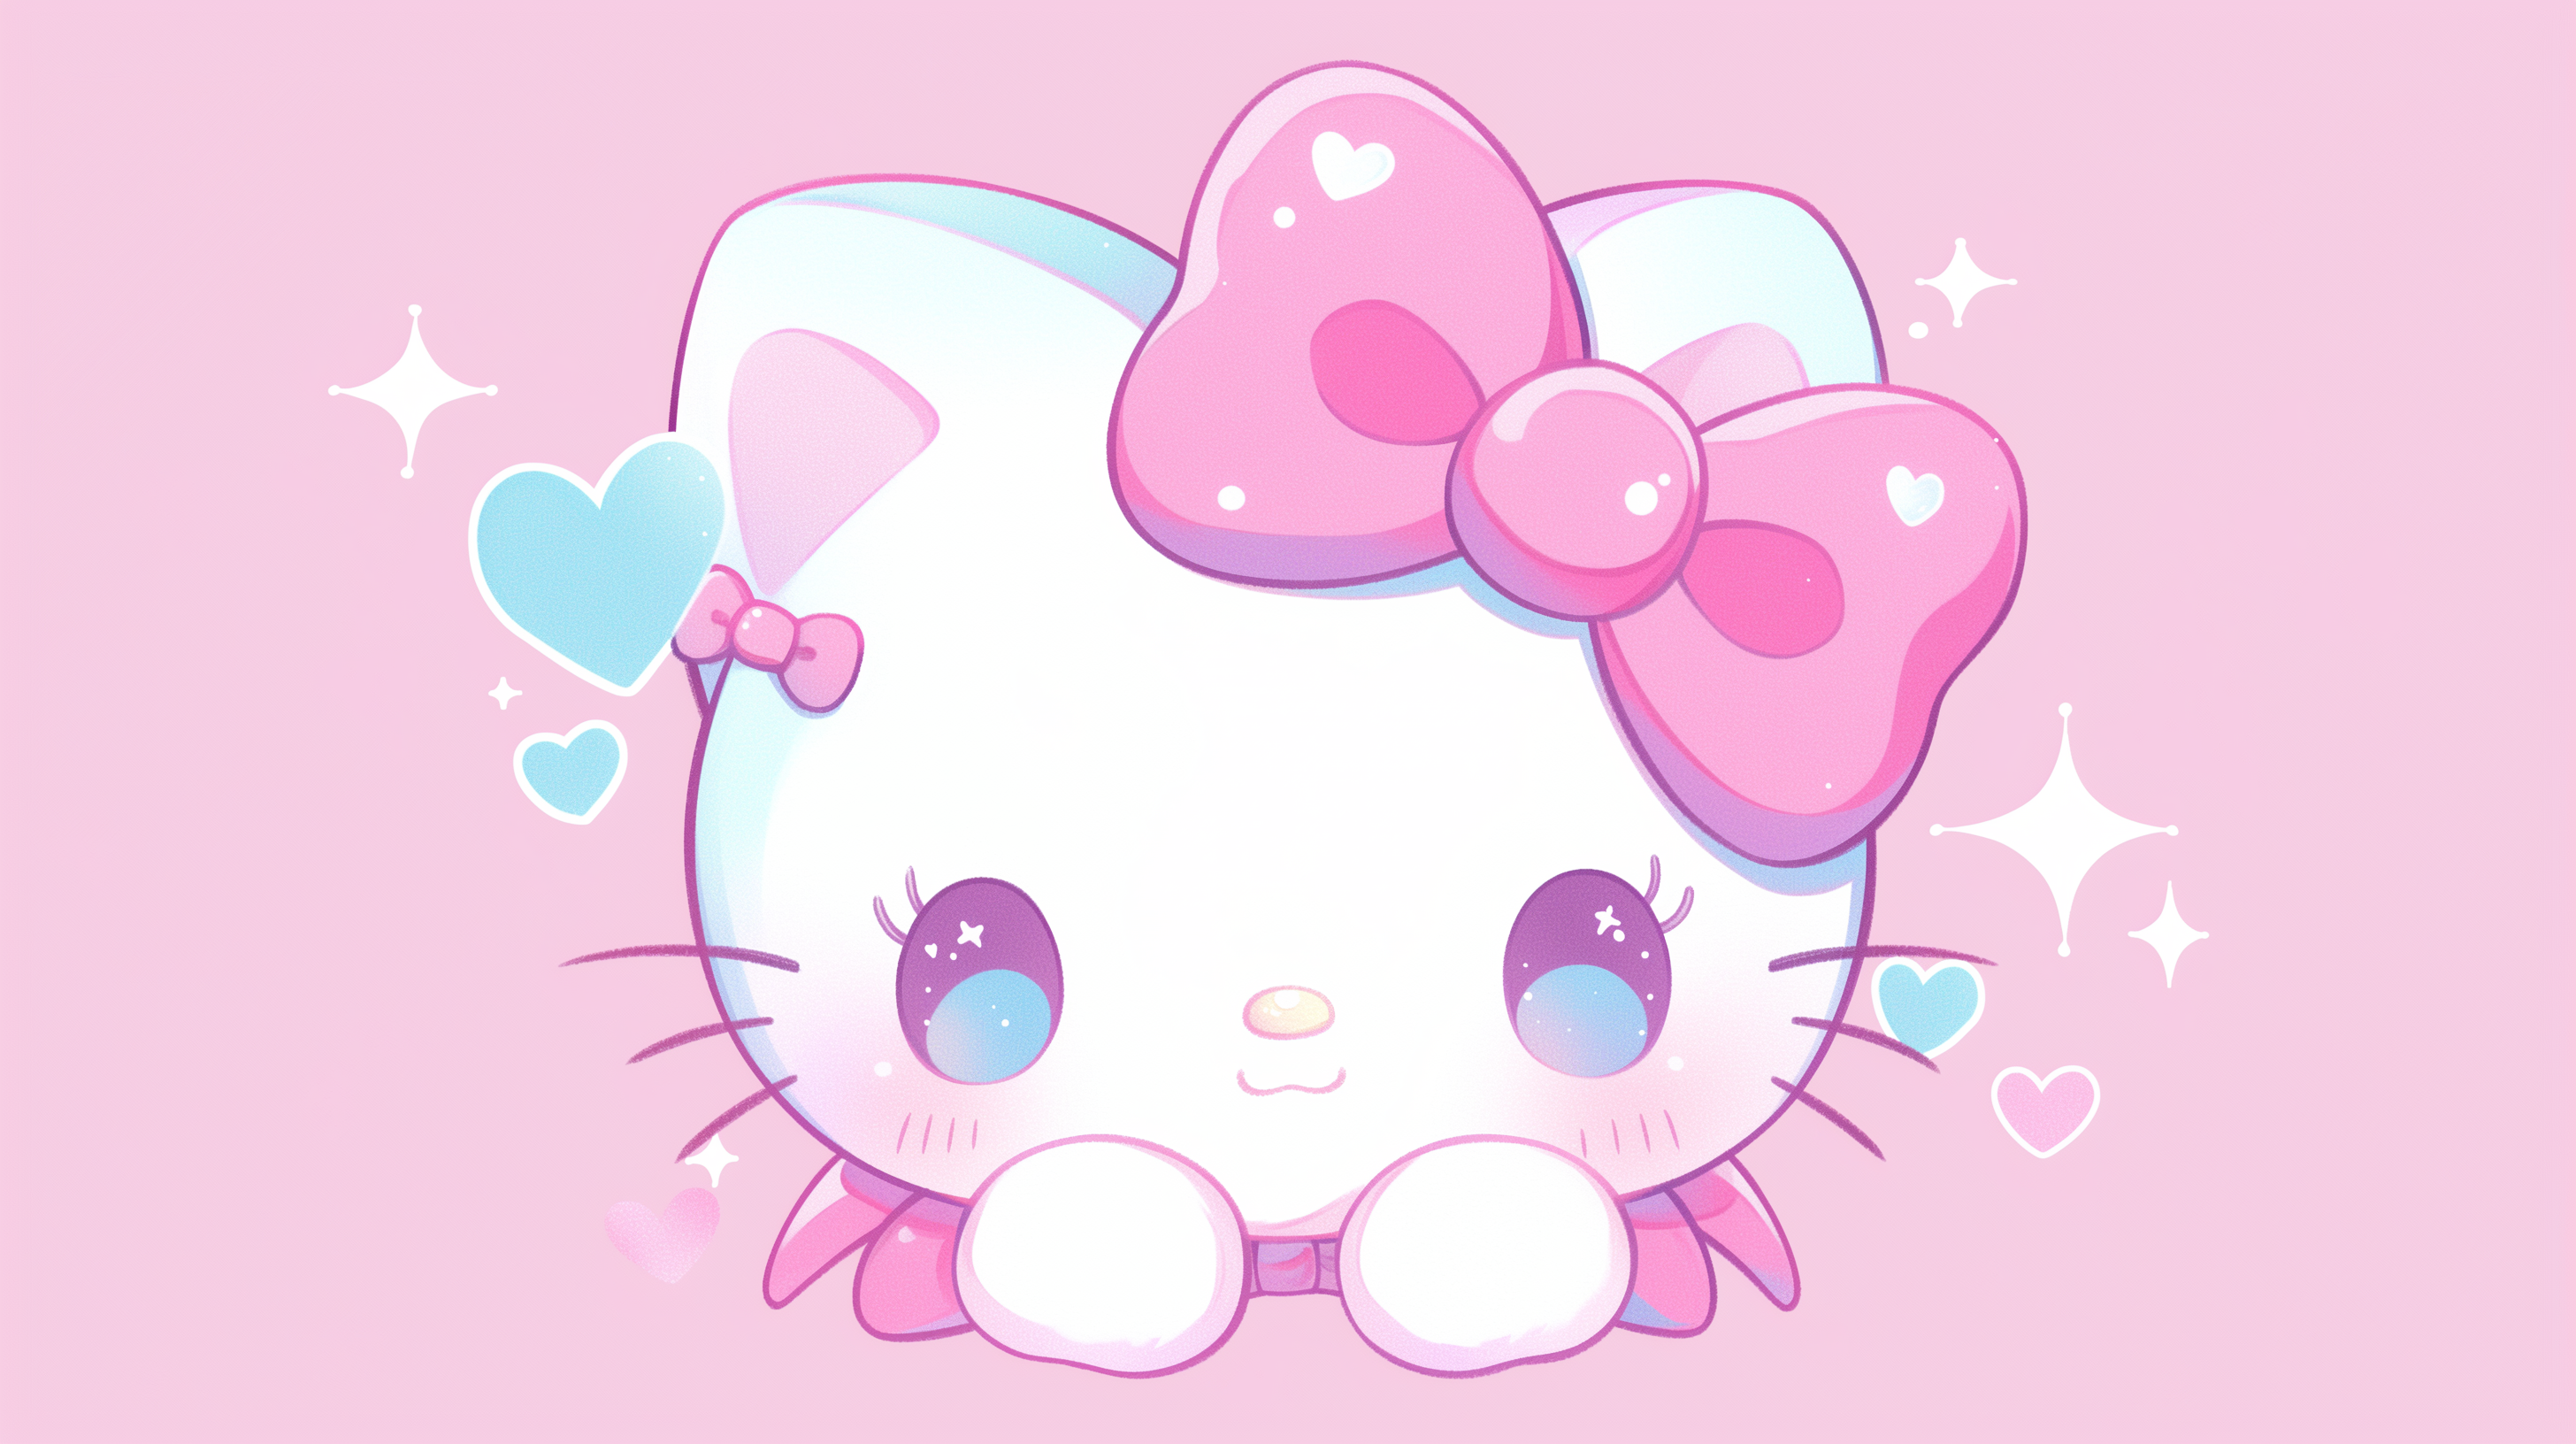 Hello Kitty - Desktop Wallpapers, Phone Wallpaper, PFP, Gifs, and More!